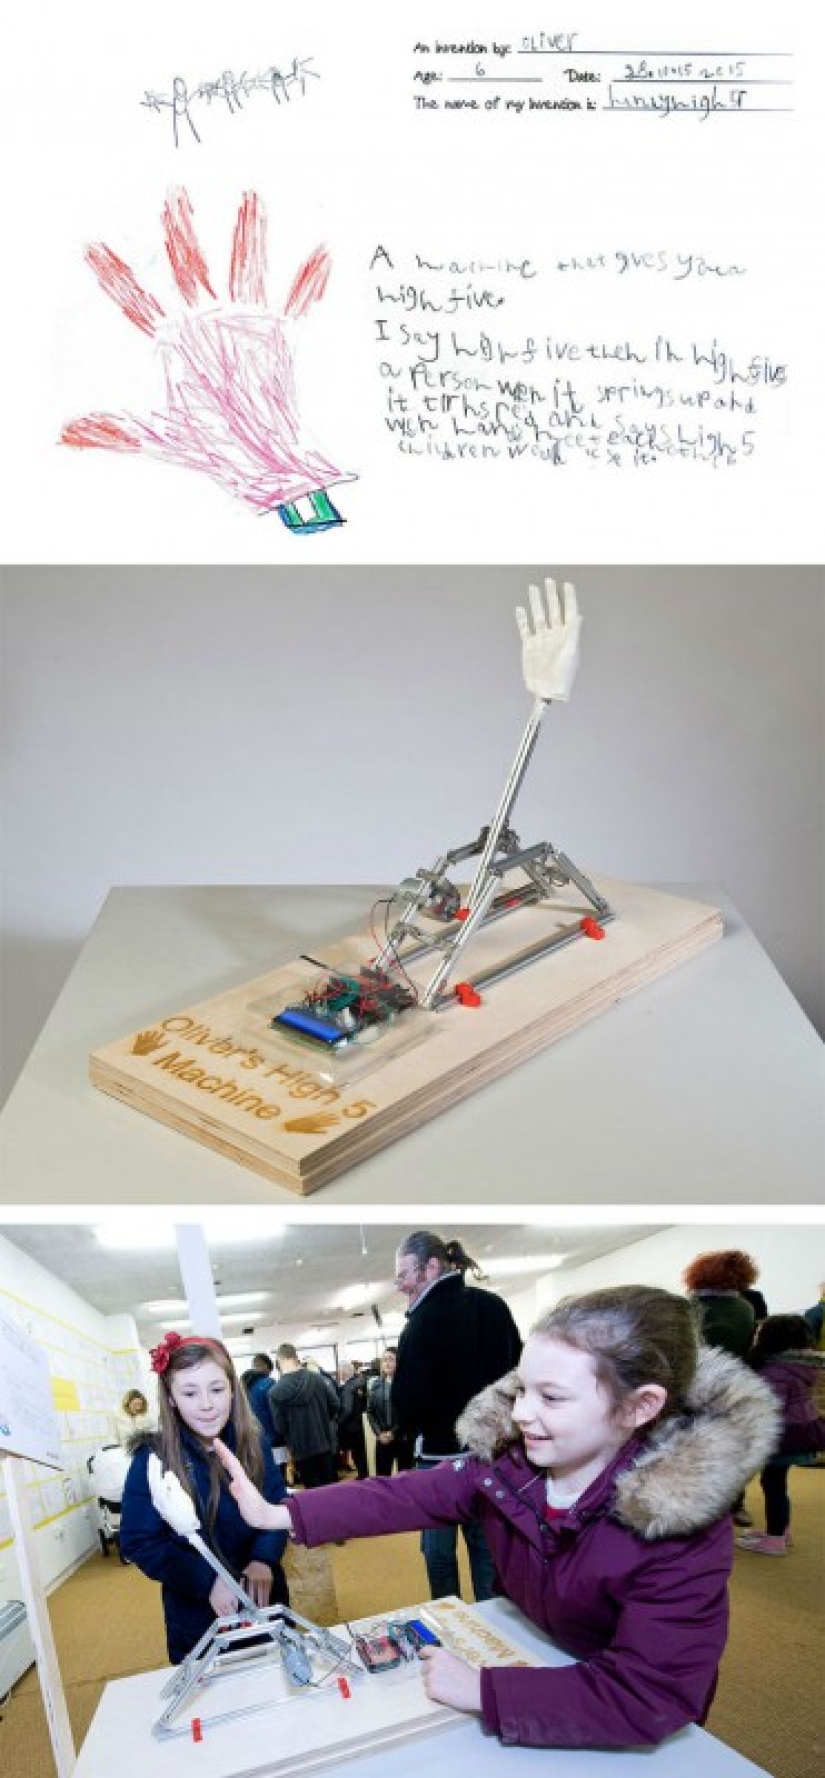 Young talents: inventions invented by children